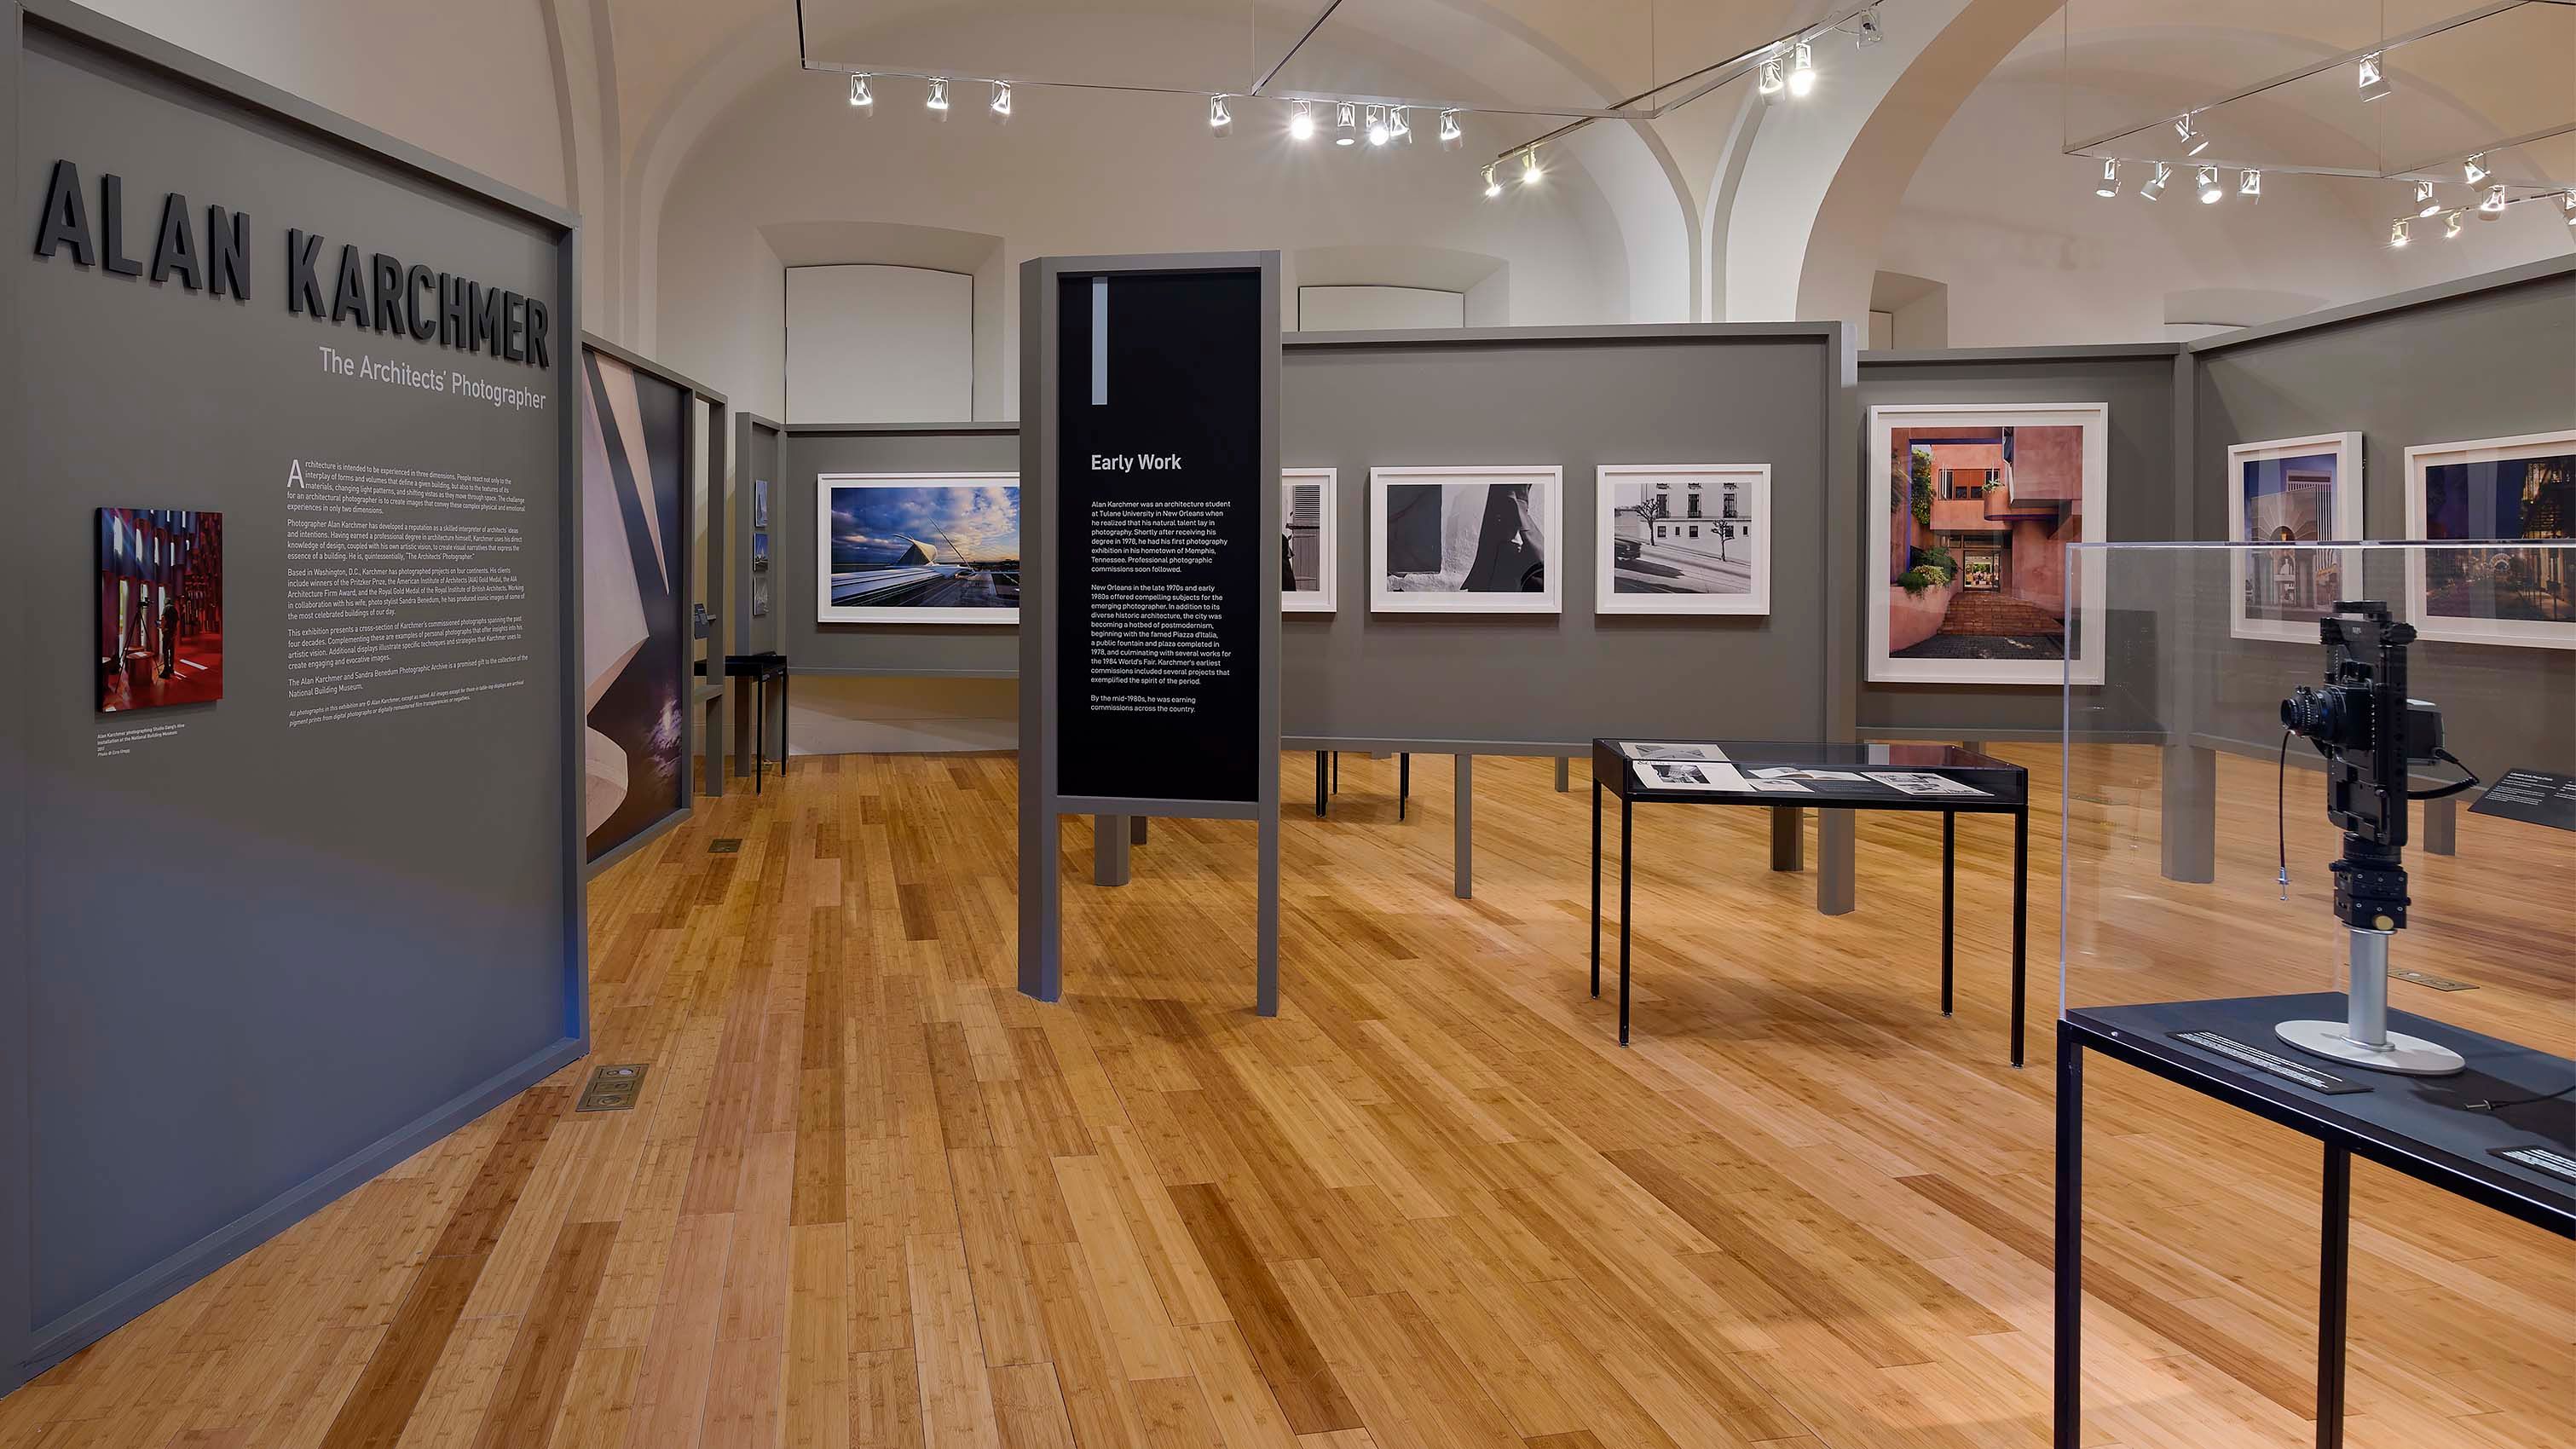 ALAN KARCHMER: THE ARCHITECTS' PHOTOGRAPHER EXHIBITION AT THE NATIONAL BUILDING MUSEUM